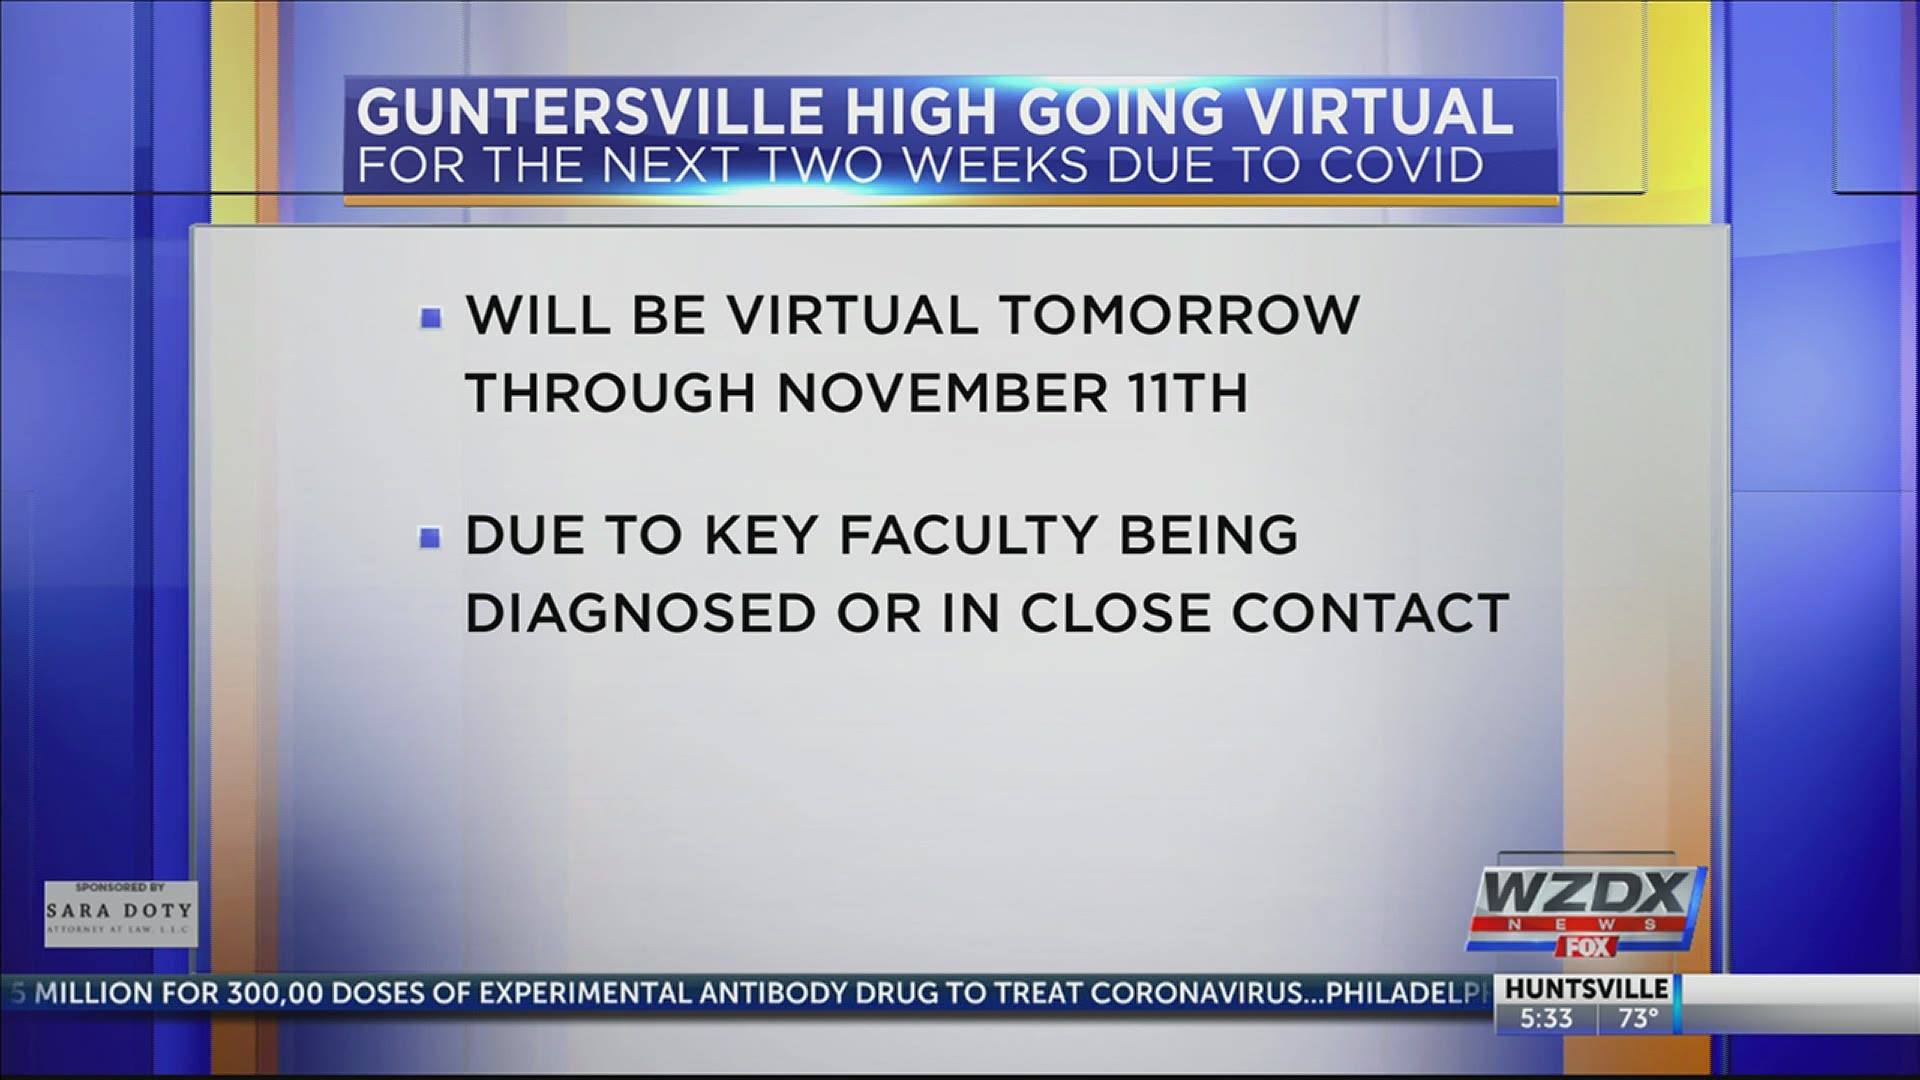 The district said this is due to key faculty and staff being diagnosed or having been in close contact with someone who has been diagnosed with COVID-19.